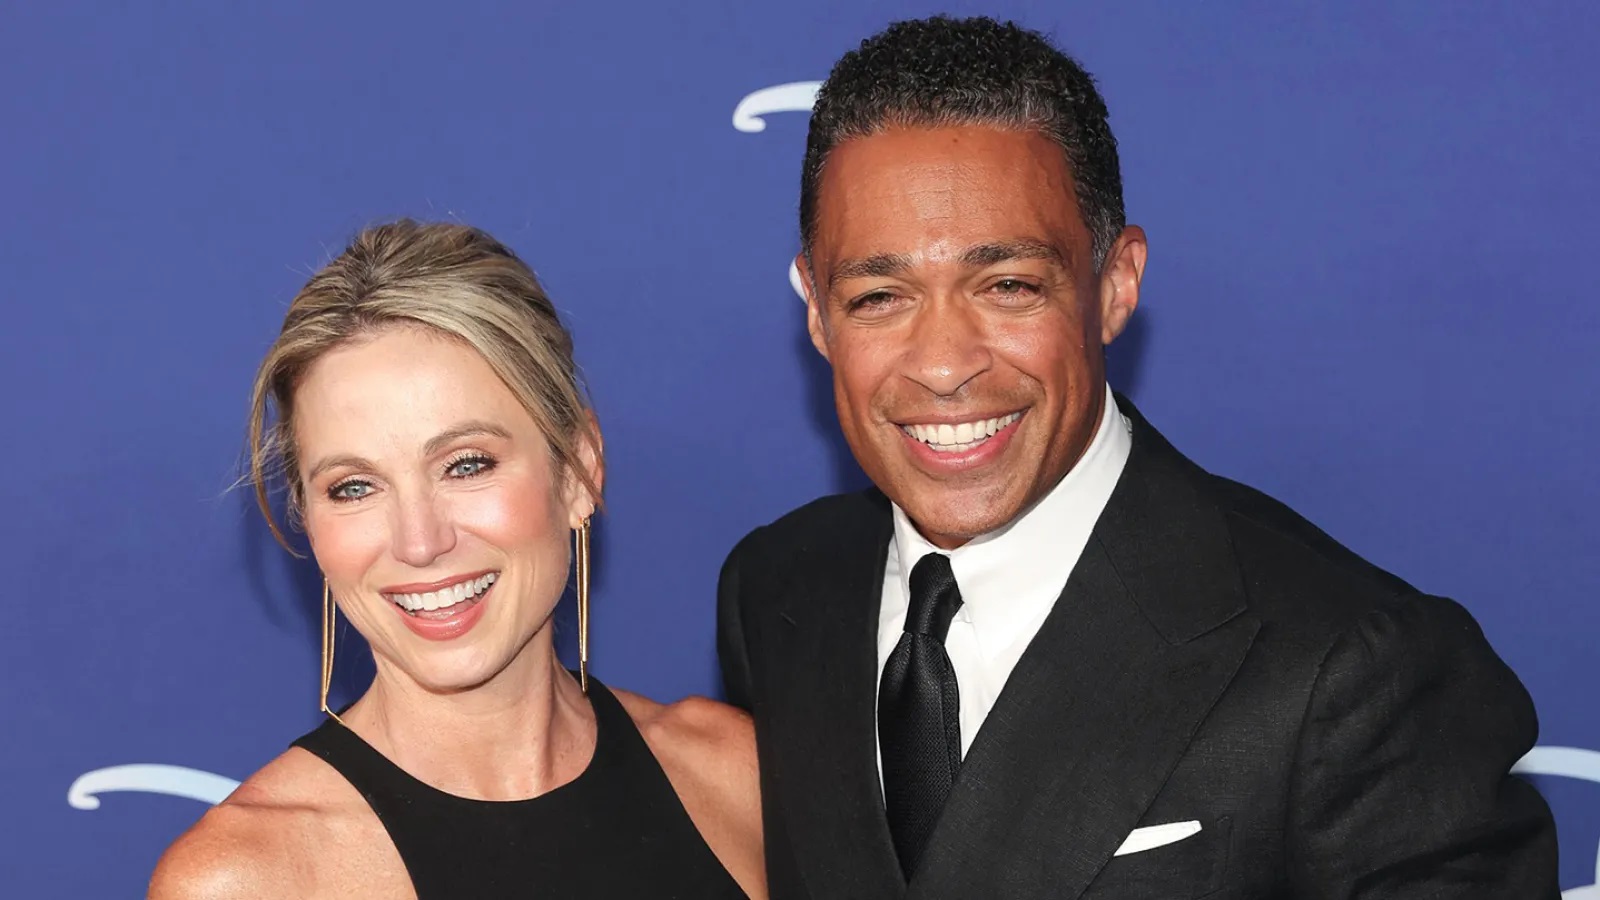 report-amy-robach-and-t-j-holmes-ex-spouses-are-dating-each-other